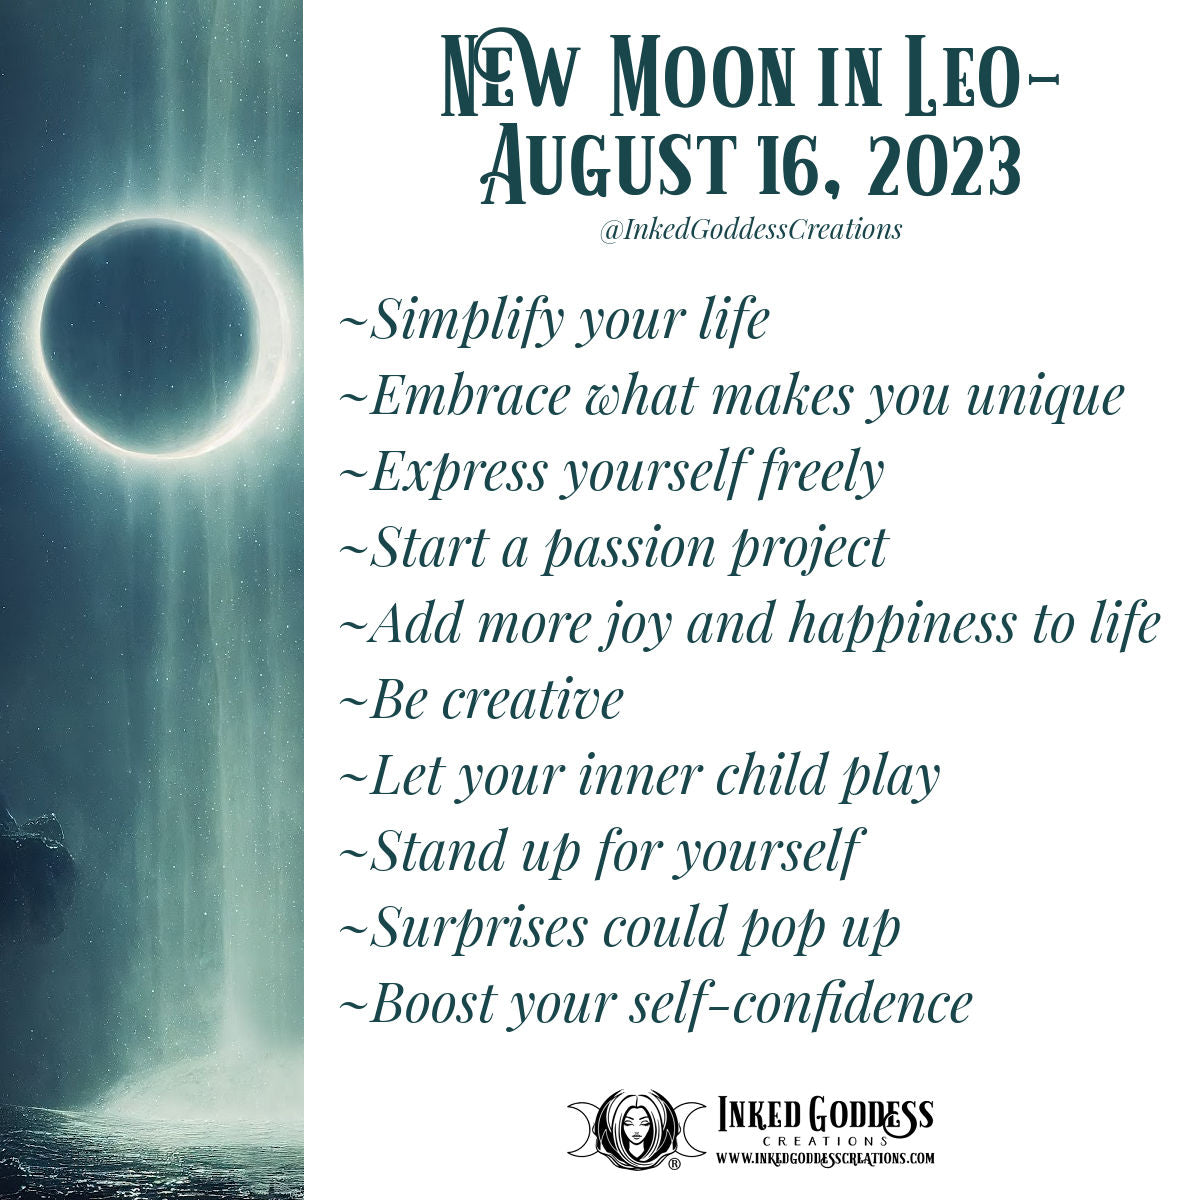 New Moon in Leo- August 16, 2023